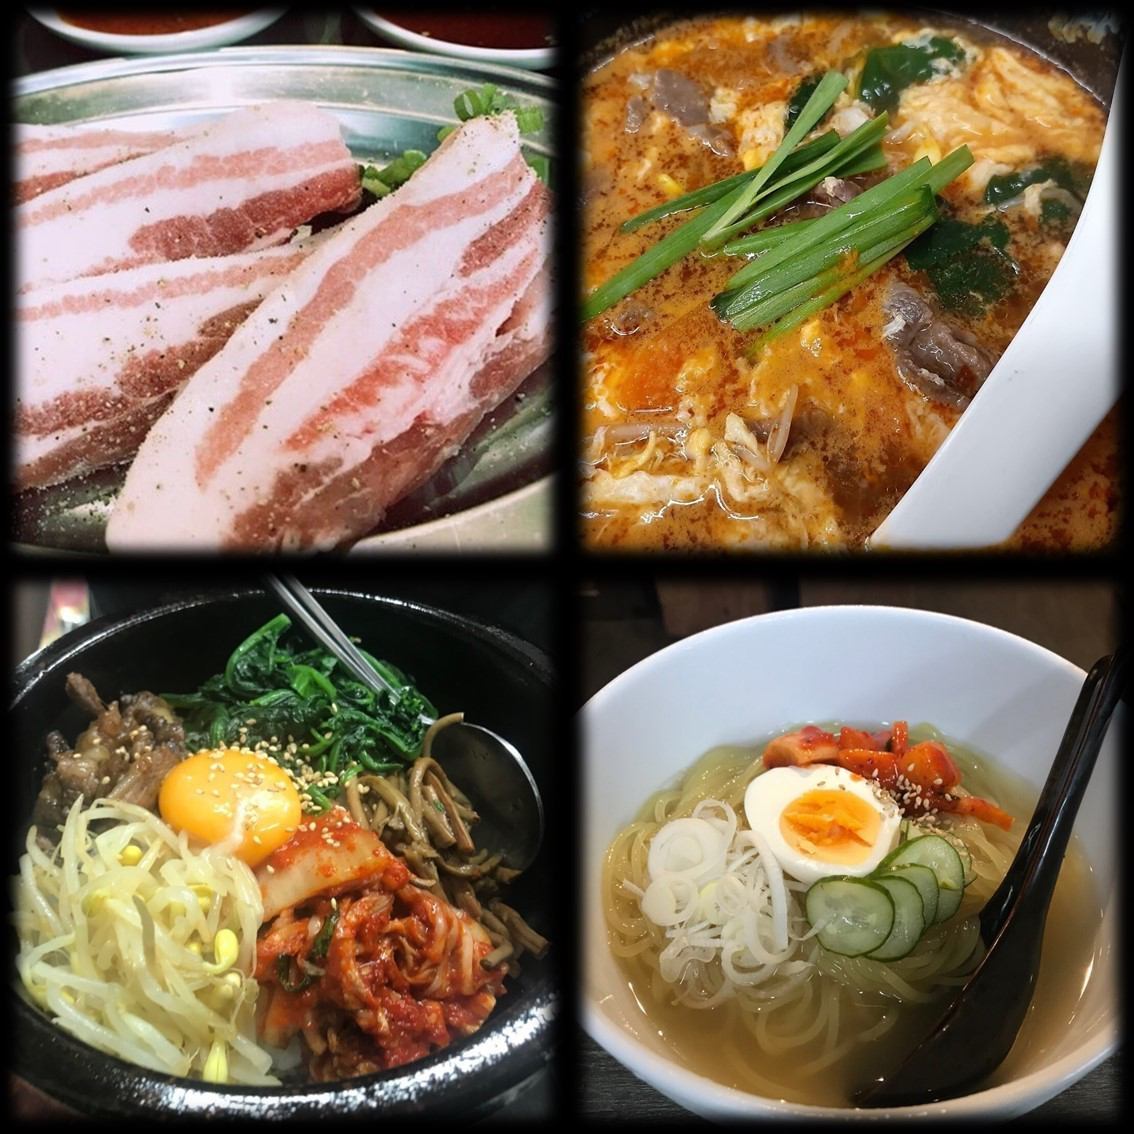 Haru-kun also has excellent Korean dishes such as samgyeopsal, cold noodles, and bibimbap☆